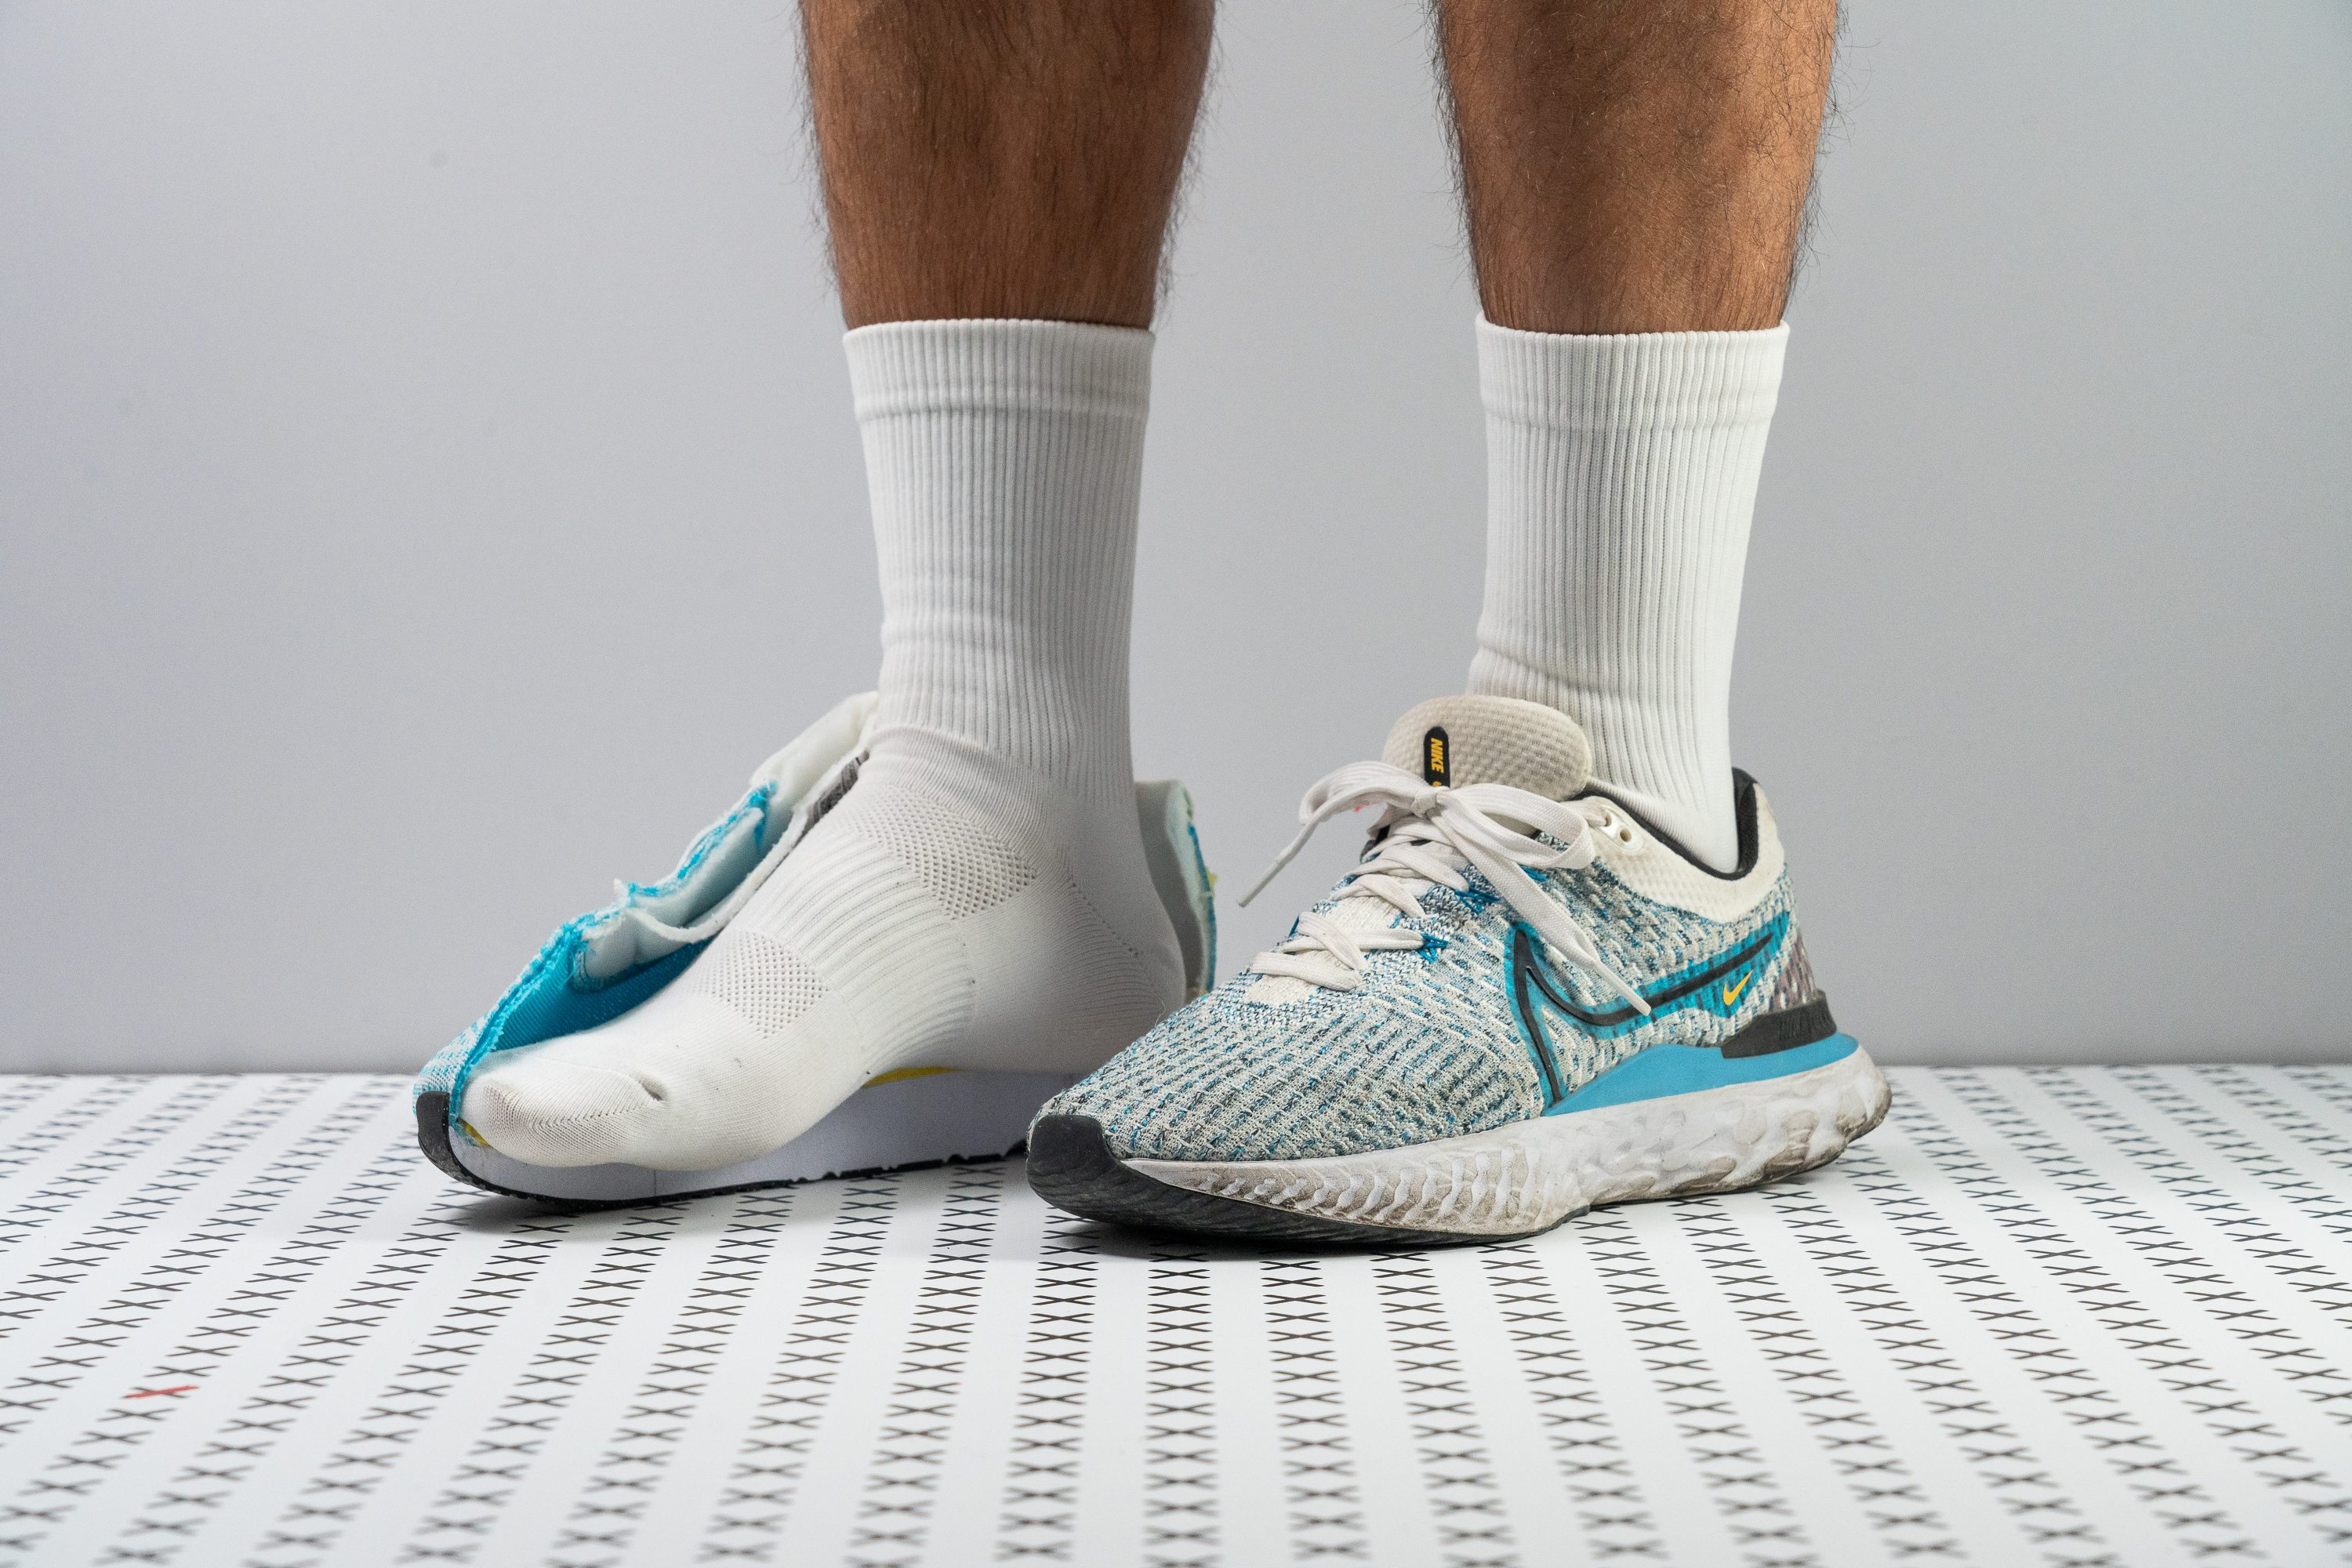 Nike React Infinity Run Flyknit 3 Review: A Slick Shoe With An